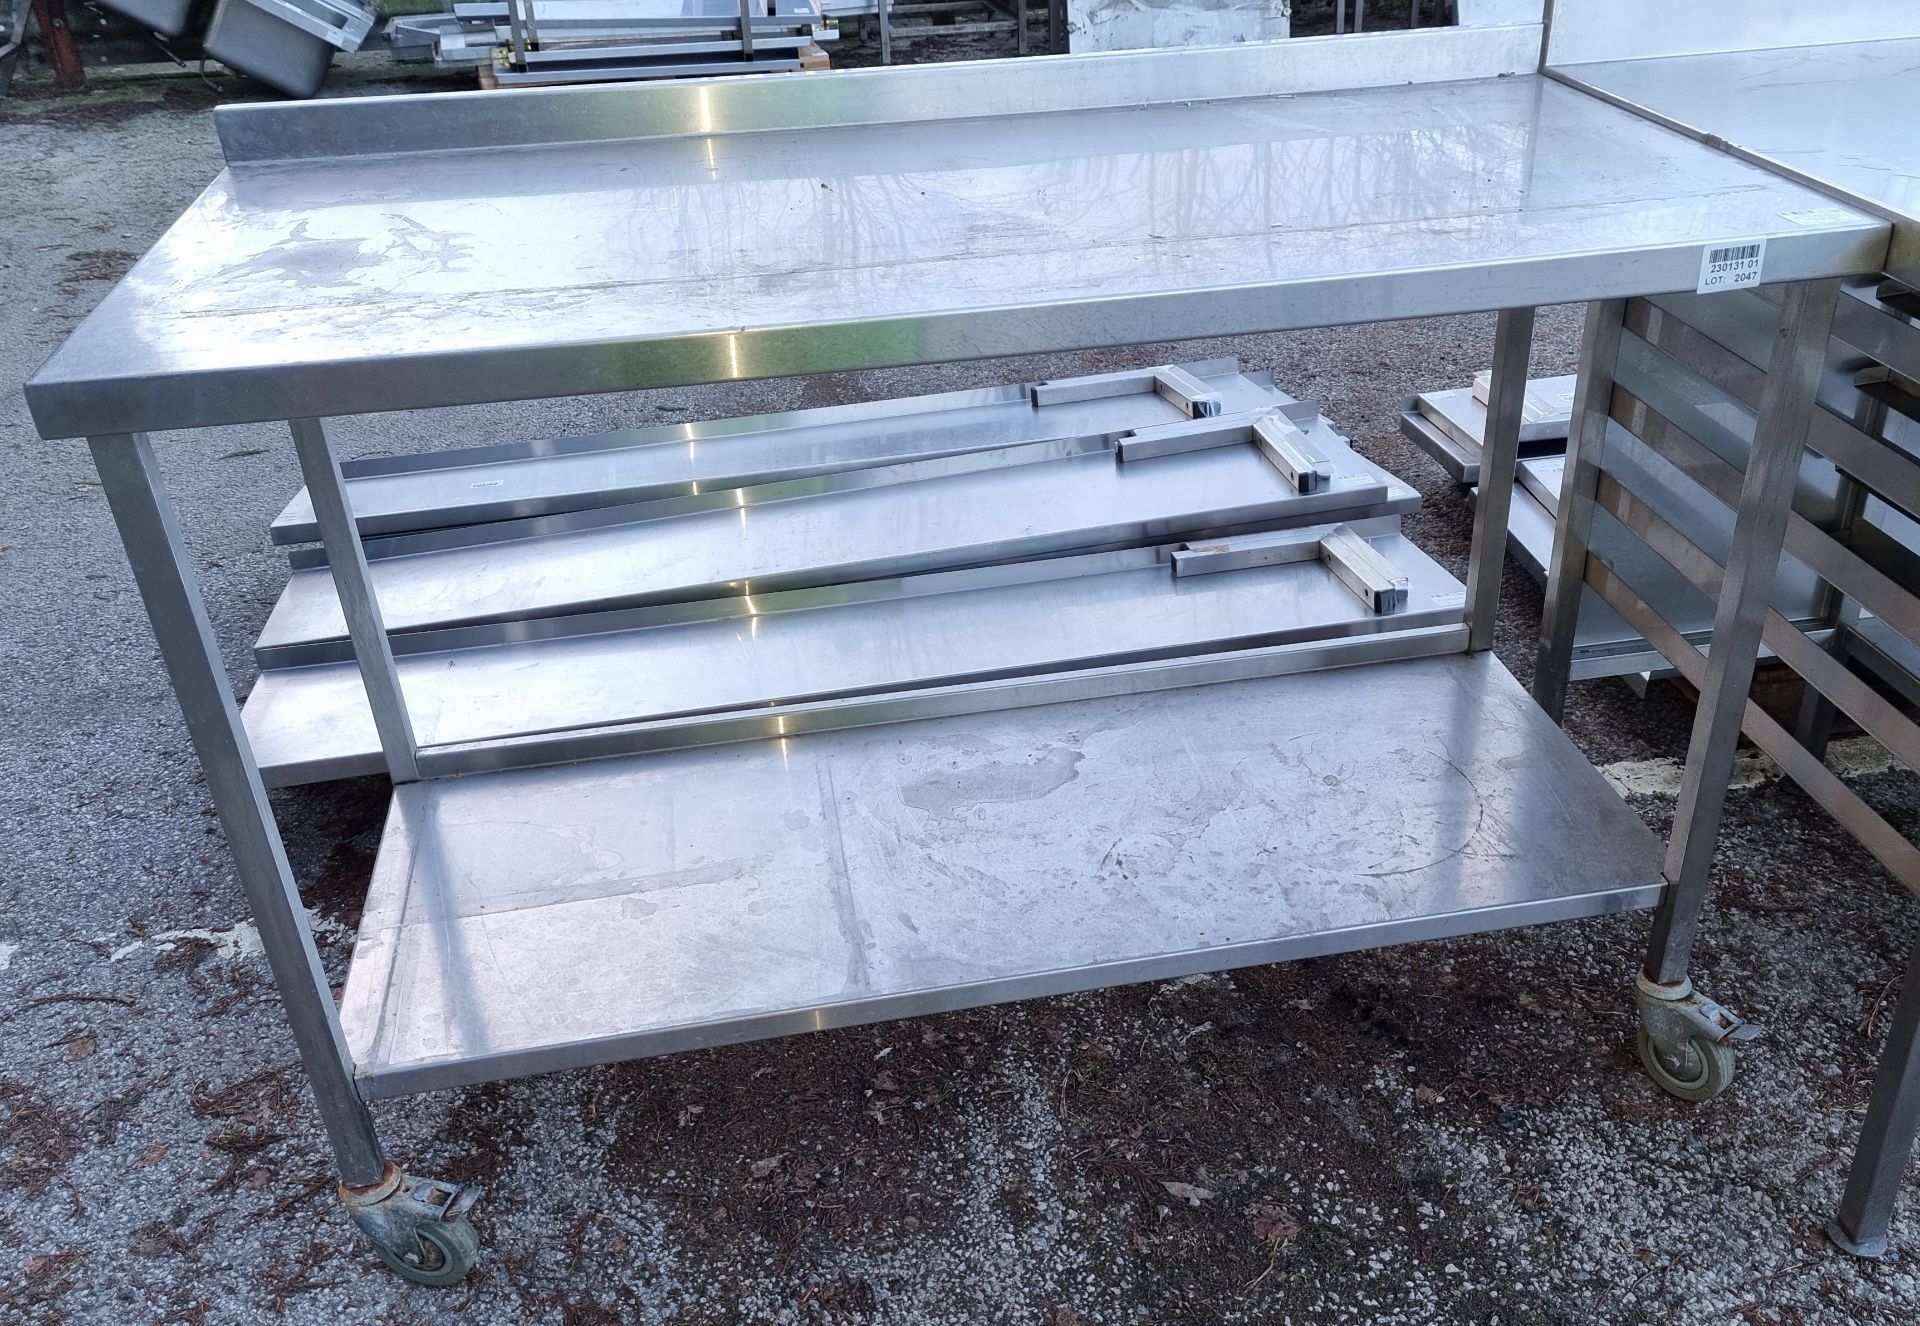 Stainless steel table with bottom shelf and upstand on castors - dimensions: 135x65x95cm - Bild 2 aus 2